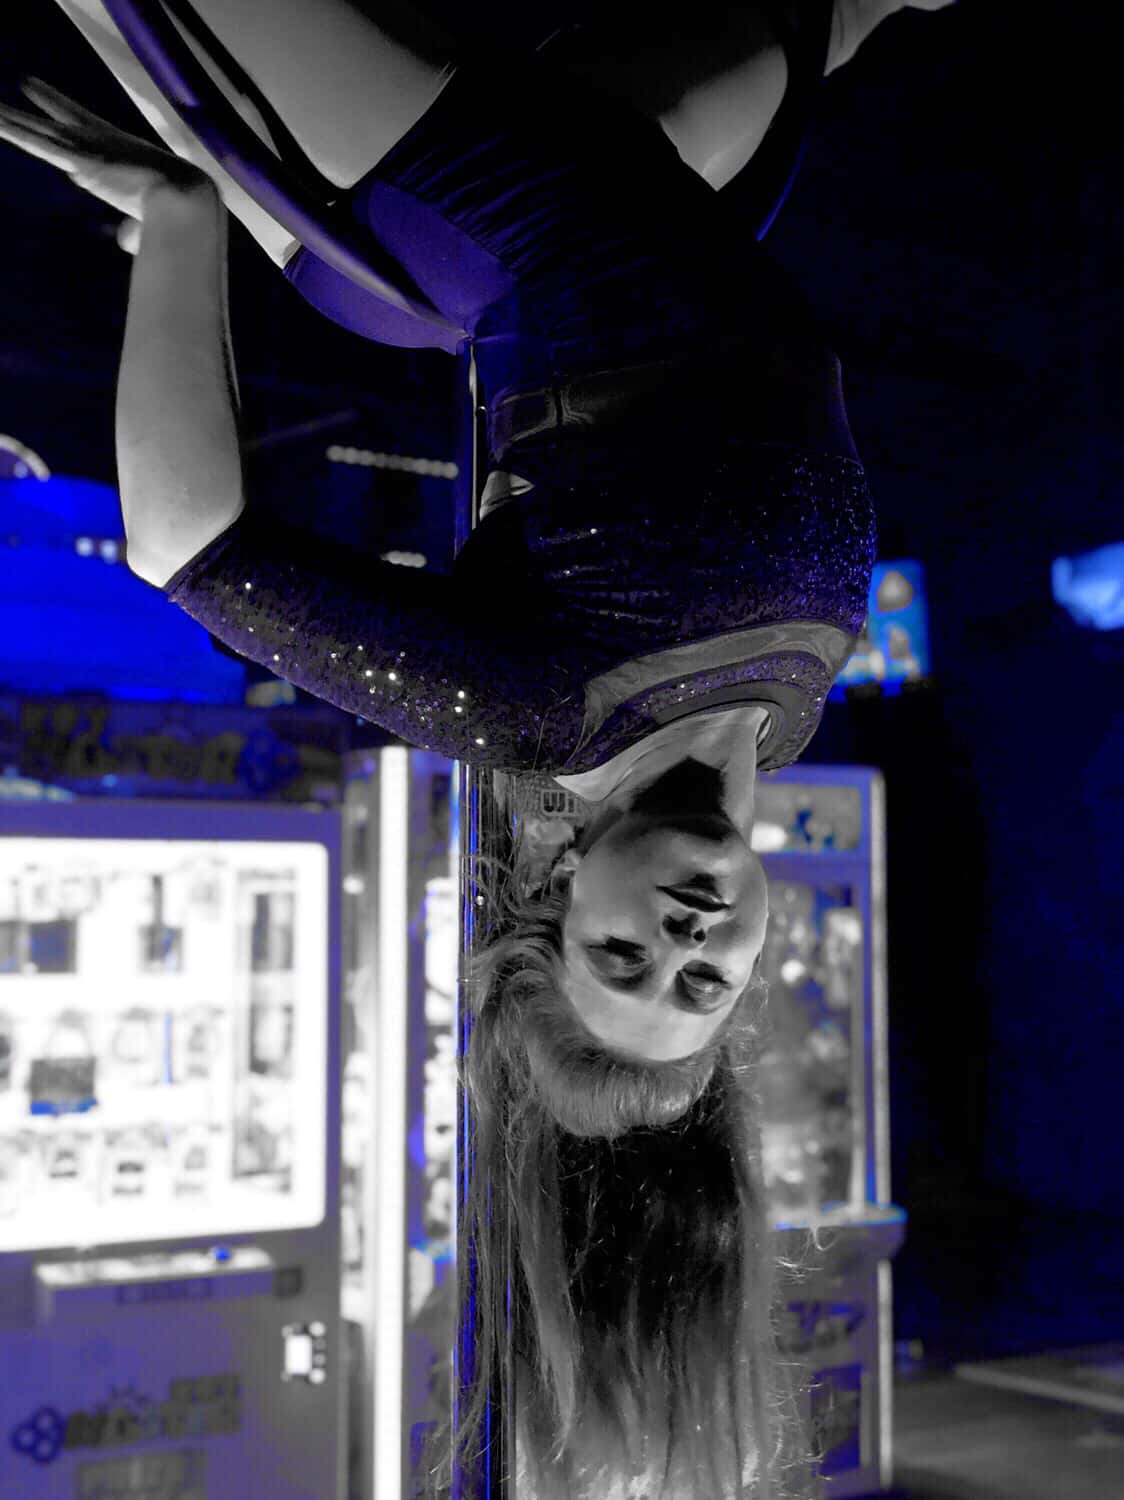 Lolly Aerialist